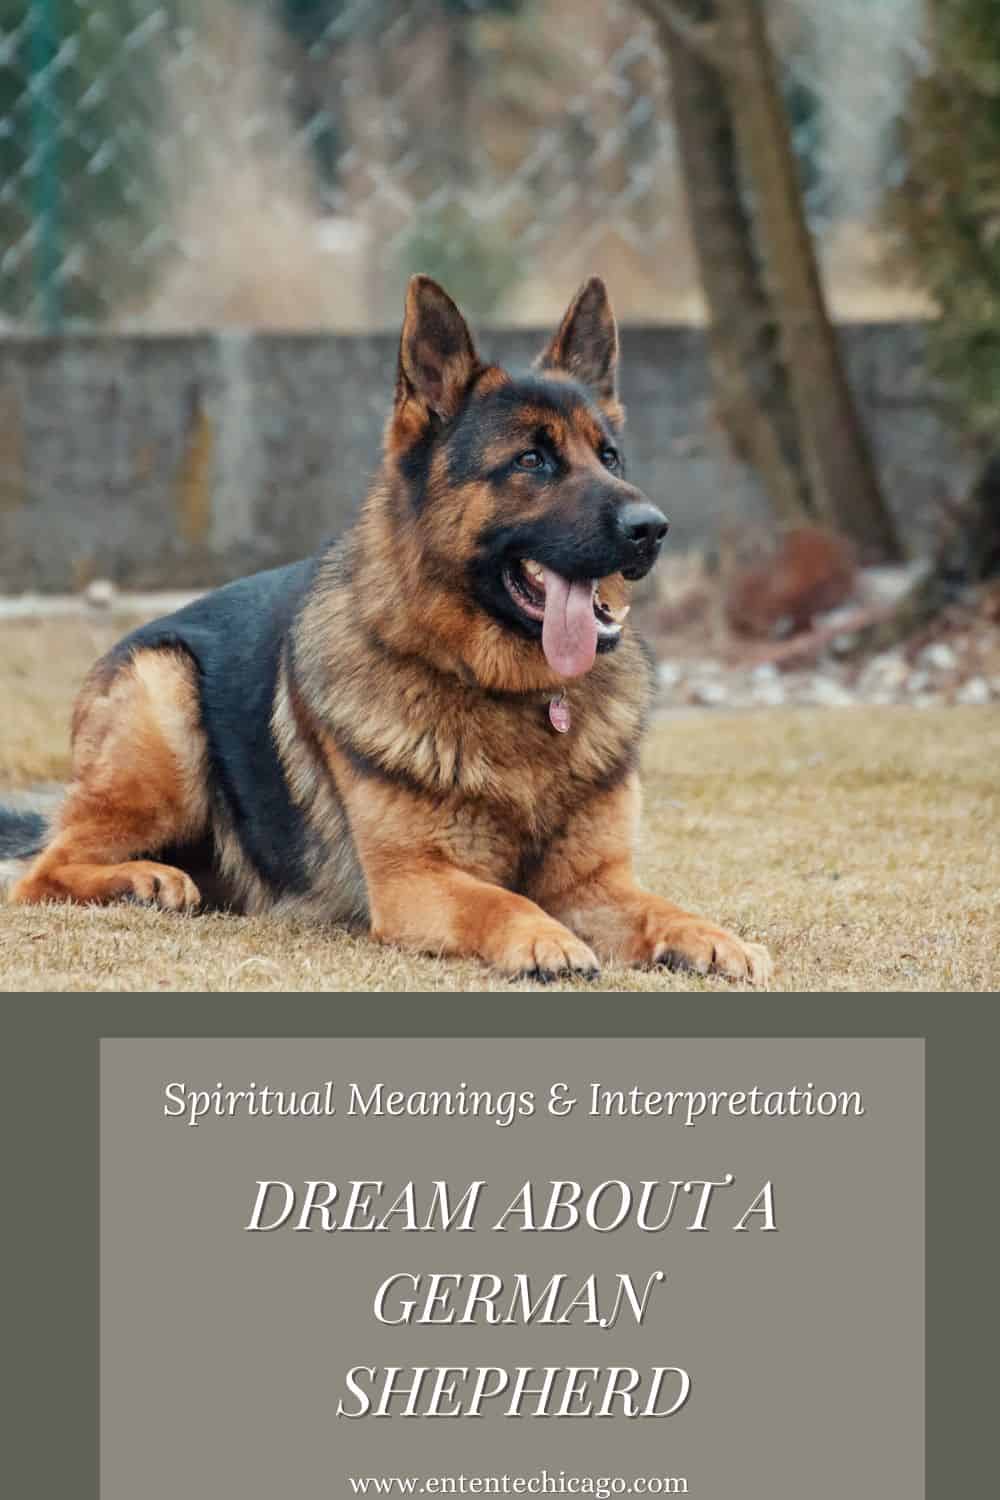 What does it mean when you dream about a German Shepherd?